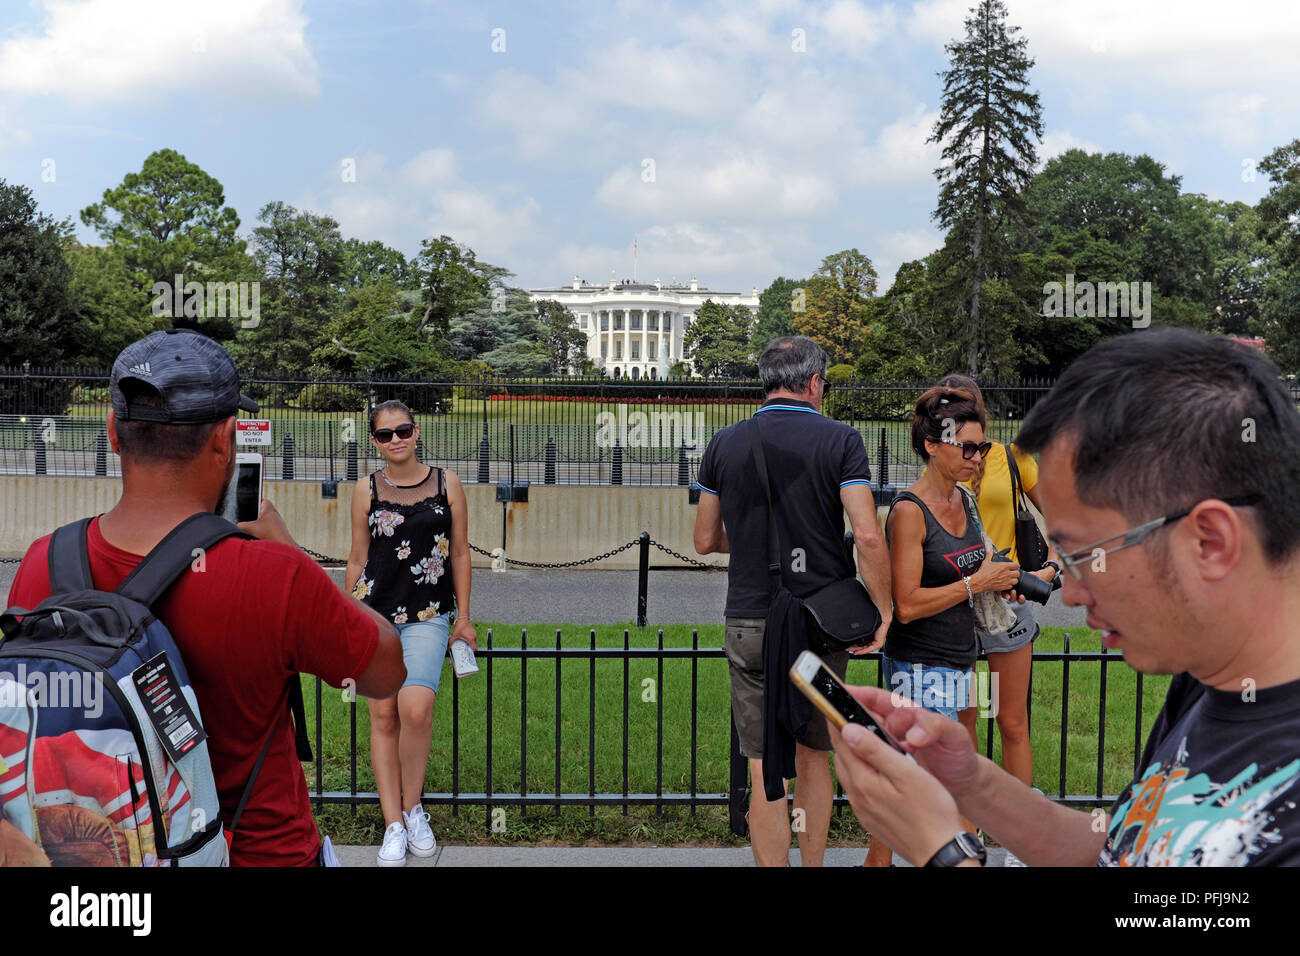 People taking photos with the U.S. White House in the far background with barriers separating the visitors from the main attraction in Washington D.C. Stock Photo